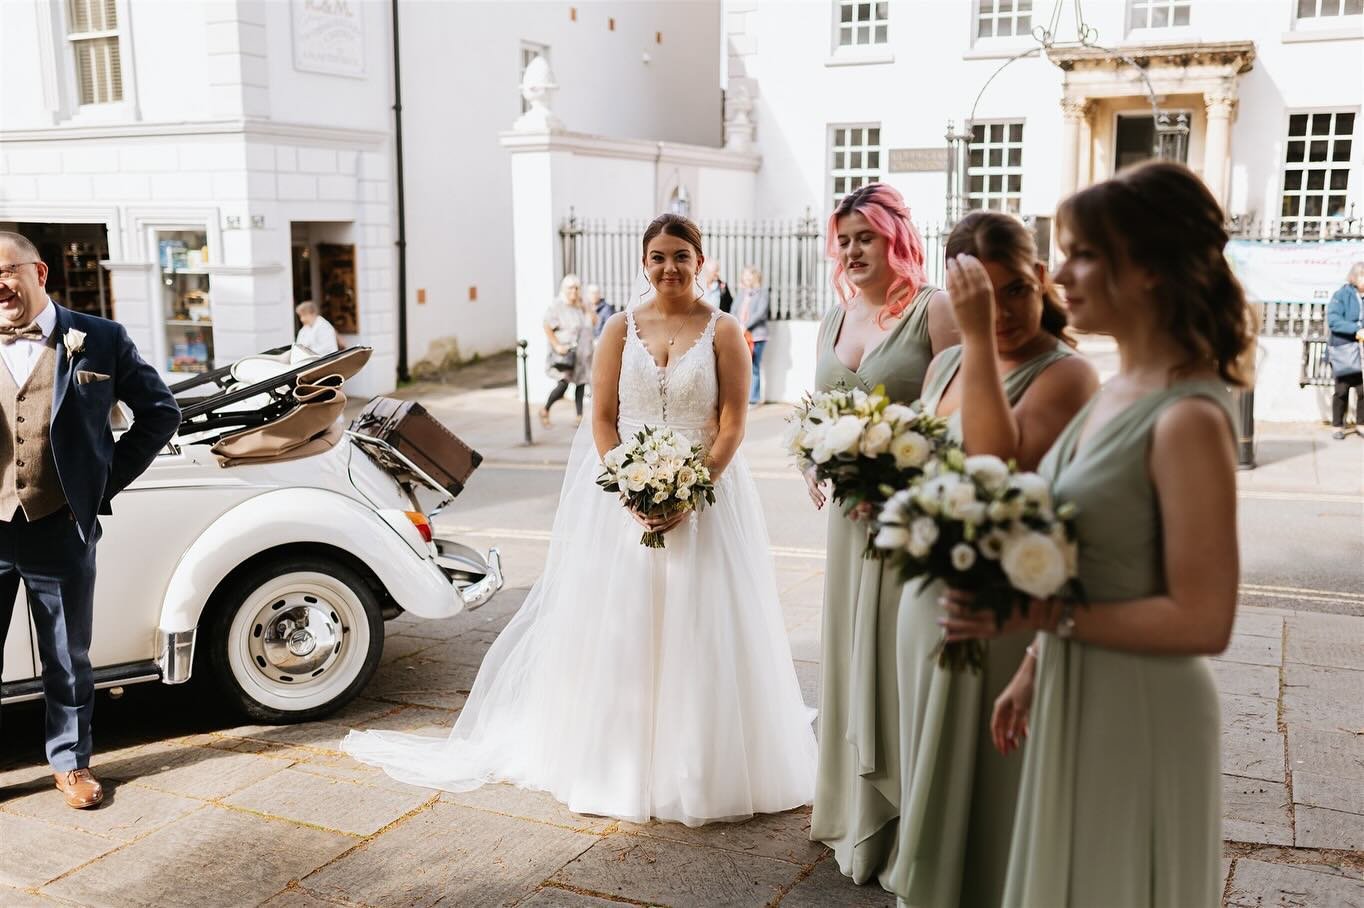 Love this photo, it&rsquo;s a real &ldquo;insta vs reality&rdquo; moment - to my left, my gorgeous bride Sarra arriving at the church, to my right, a group of people who didn&rsquo;t quite make the guest list for the daytime but wanted to see her any